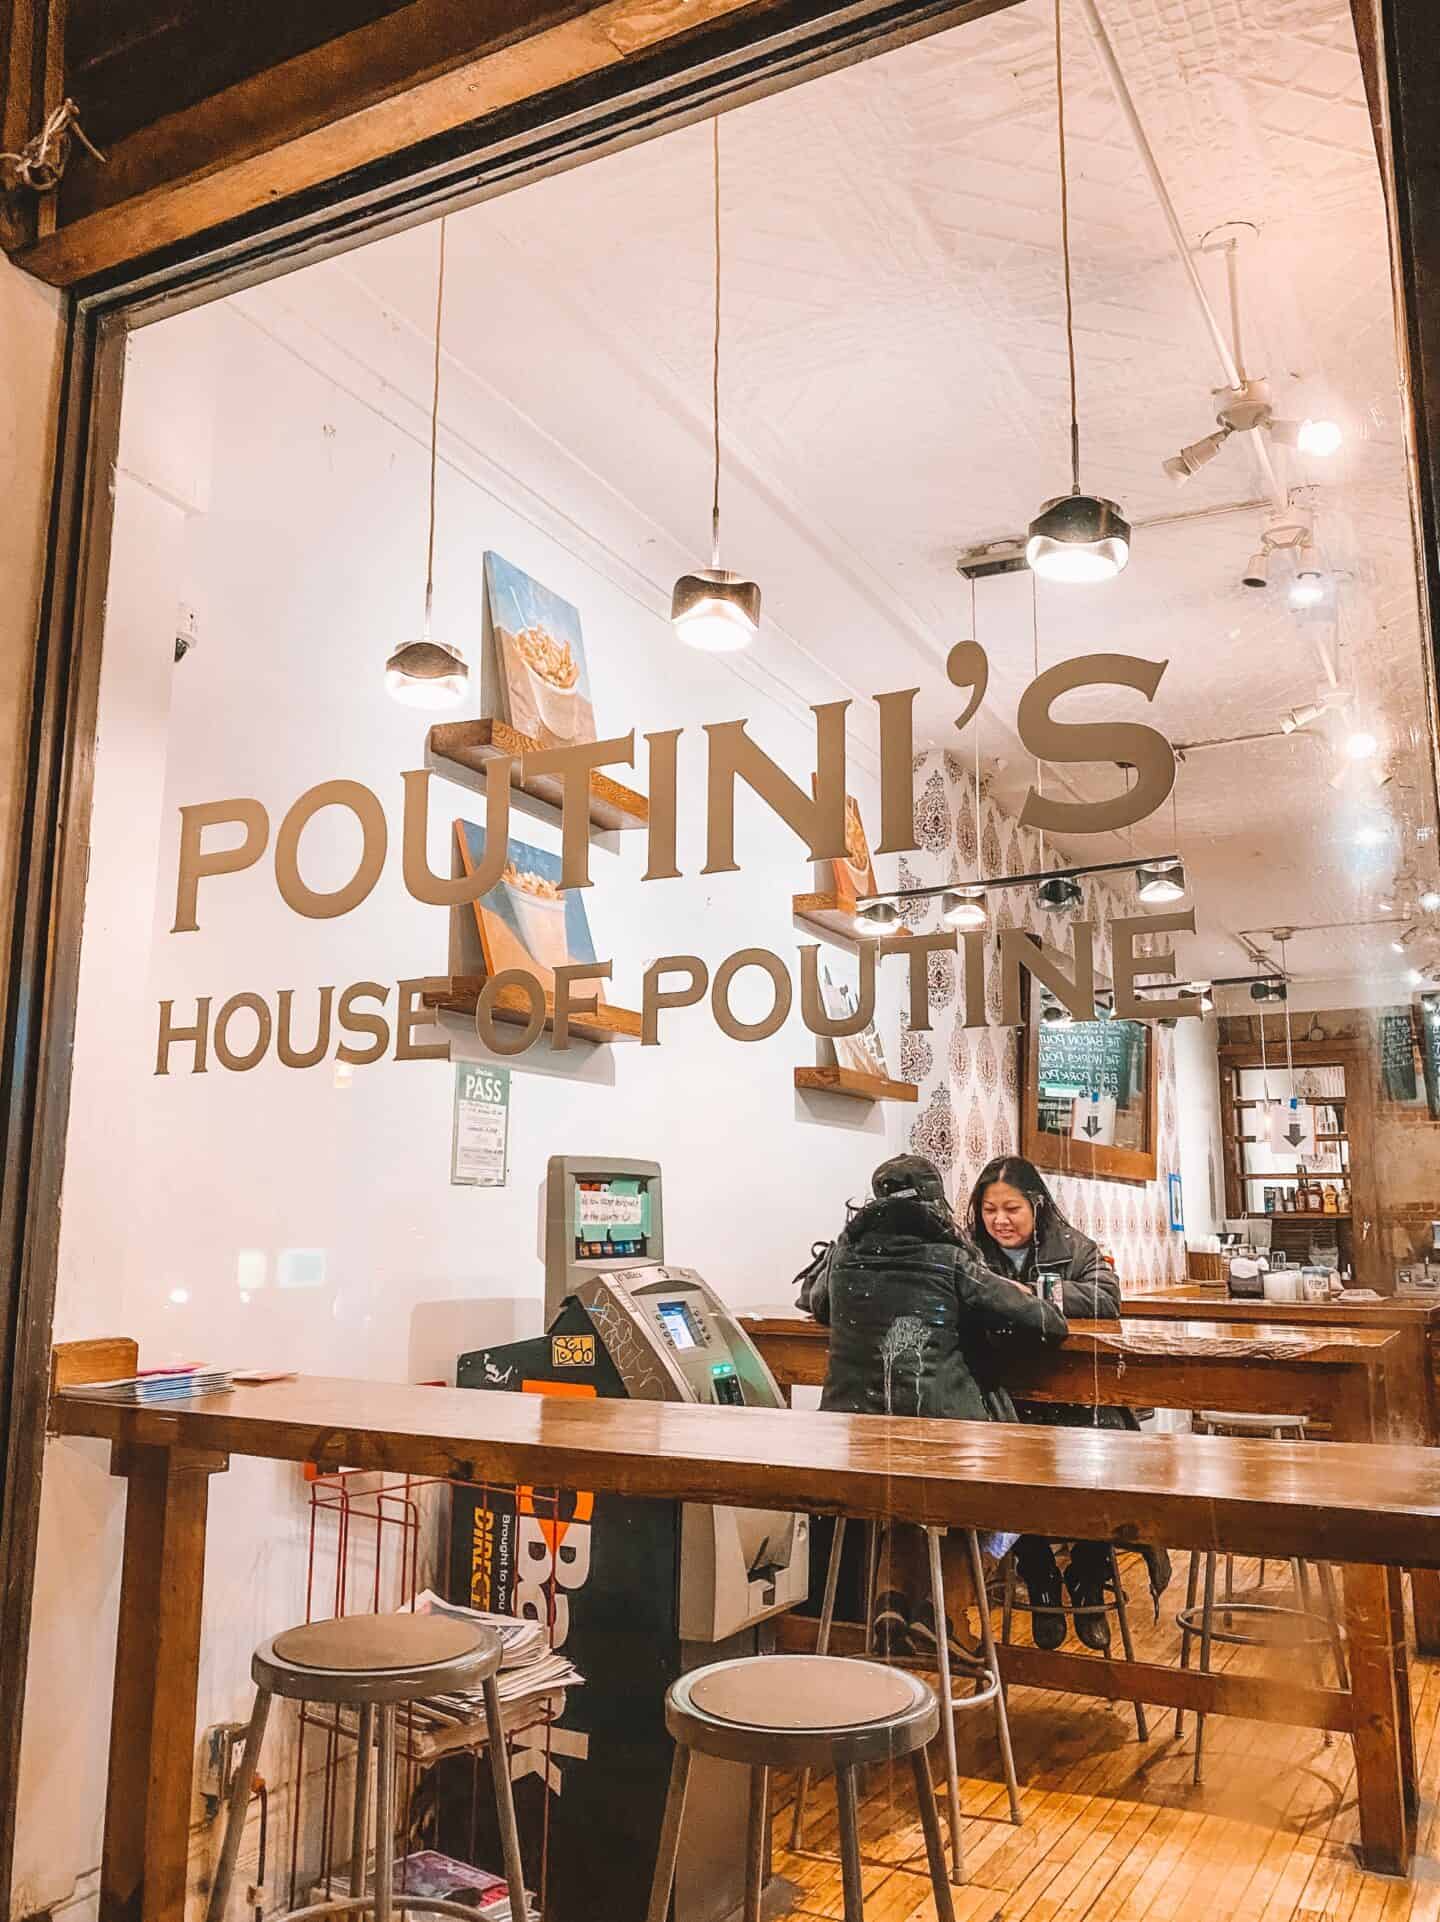 Trying poutine from Poutini's House of Poutine needs to be on your 4 day Toronto itinerary